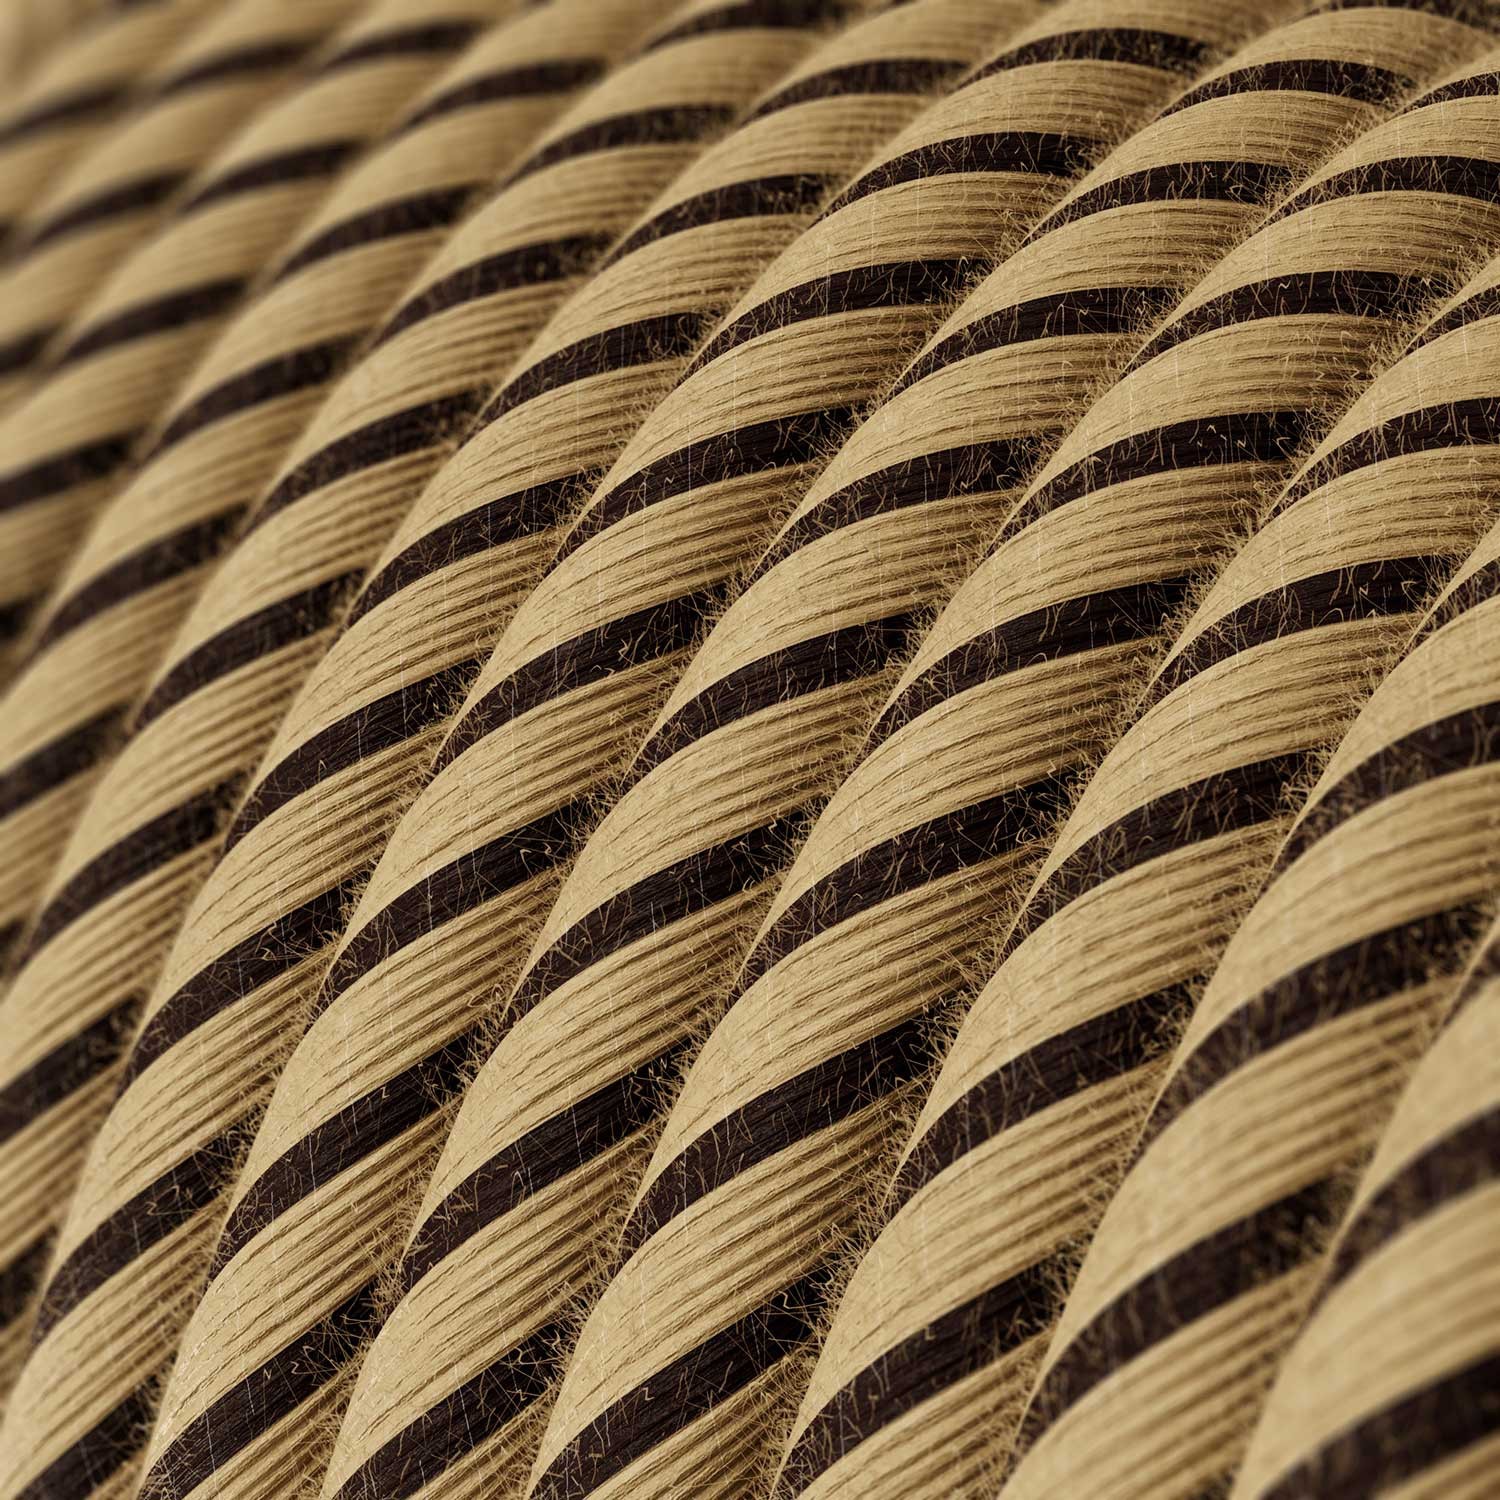 Round Electric Vertigo Cable covered by Tobacco Jute and Cotton ERD21